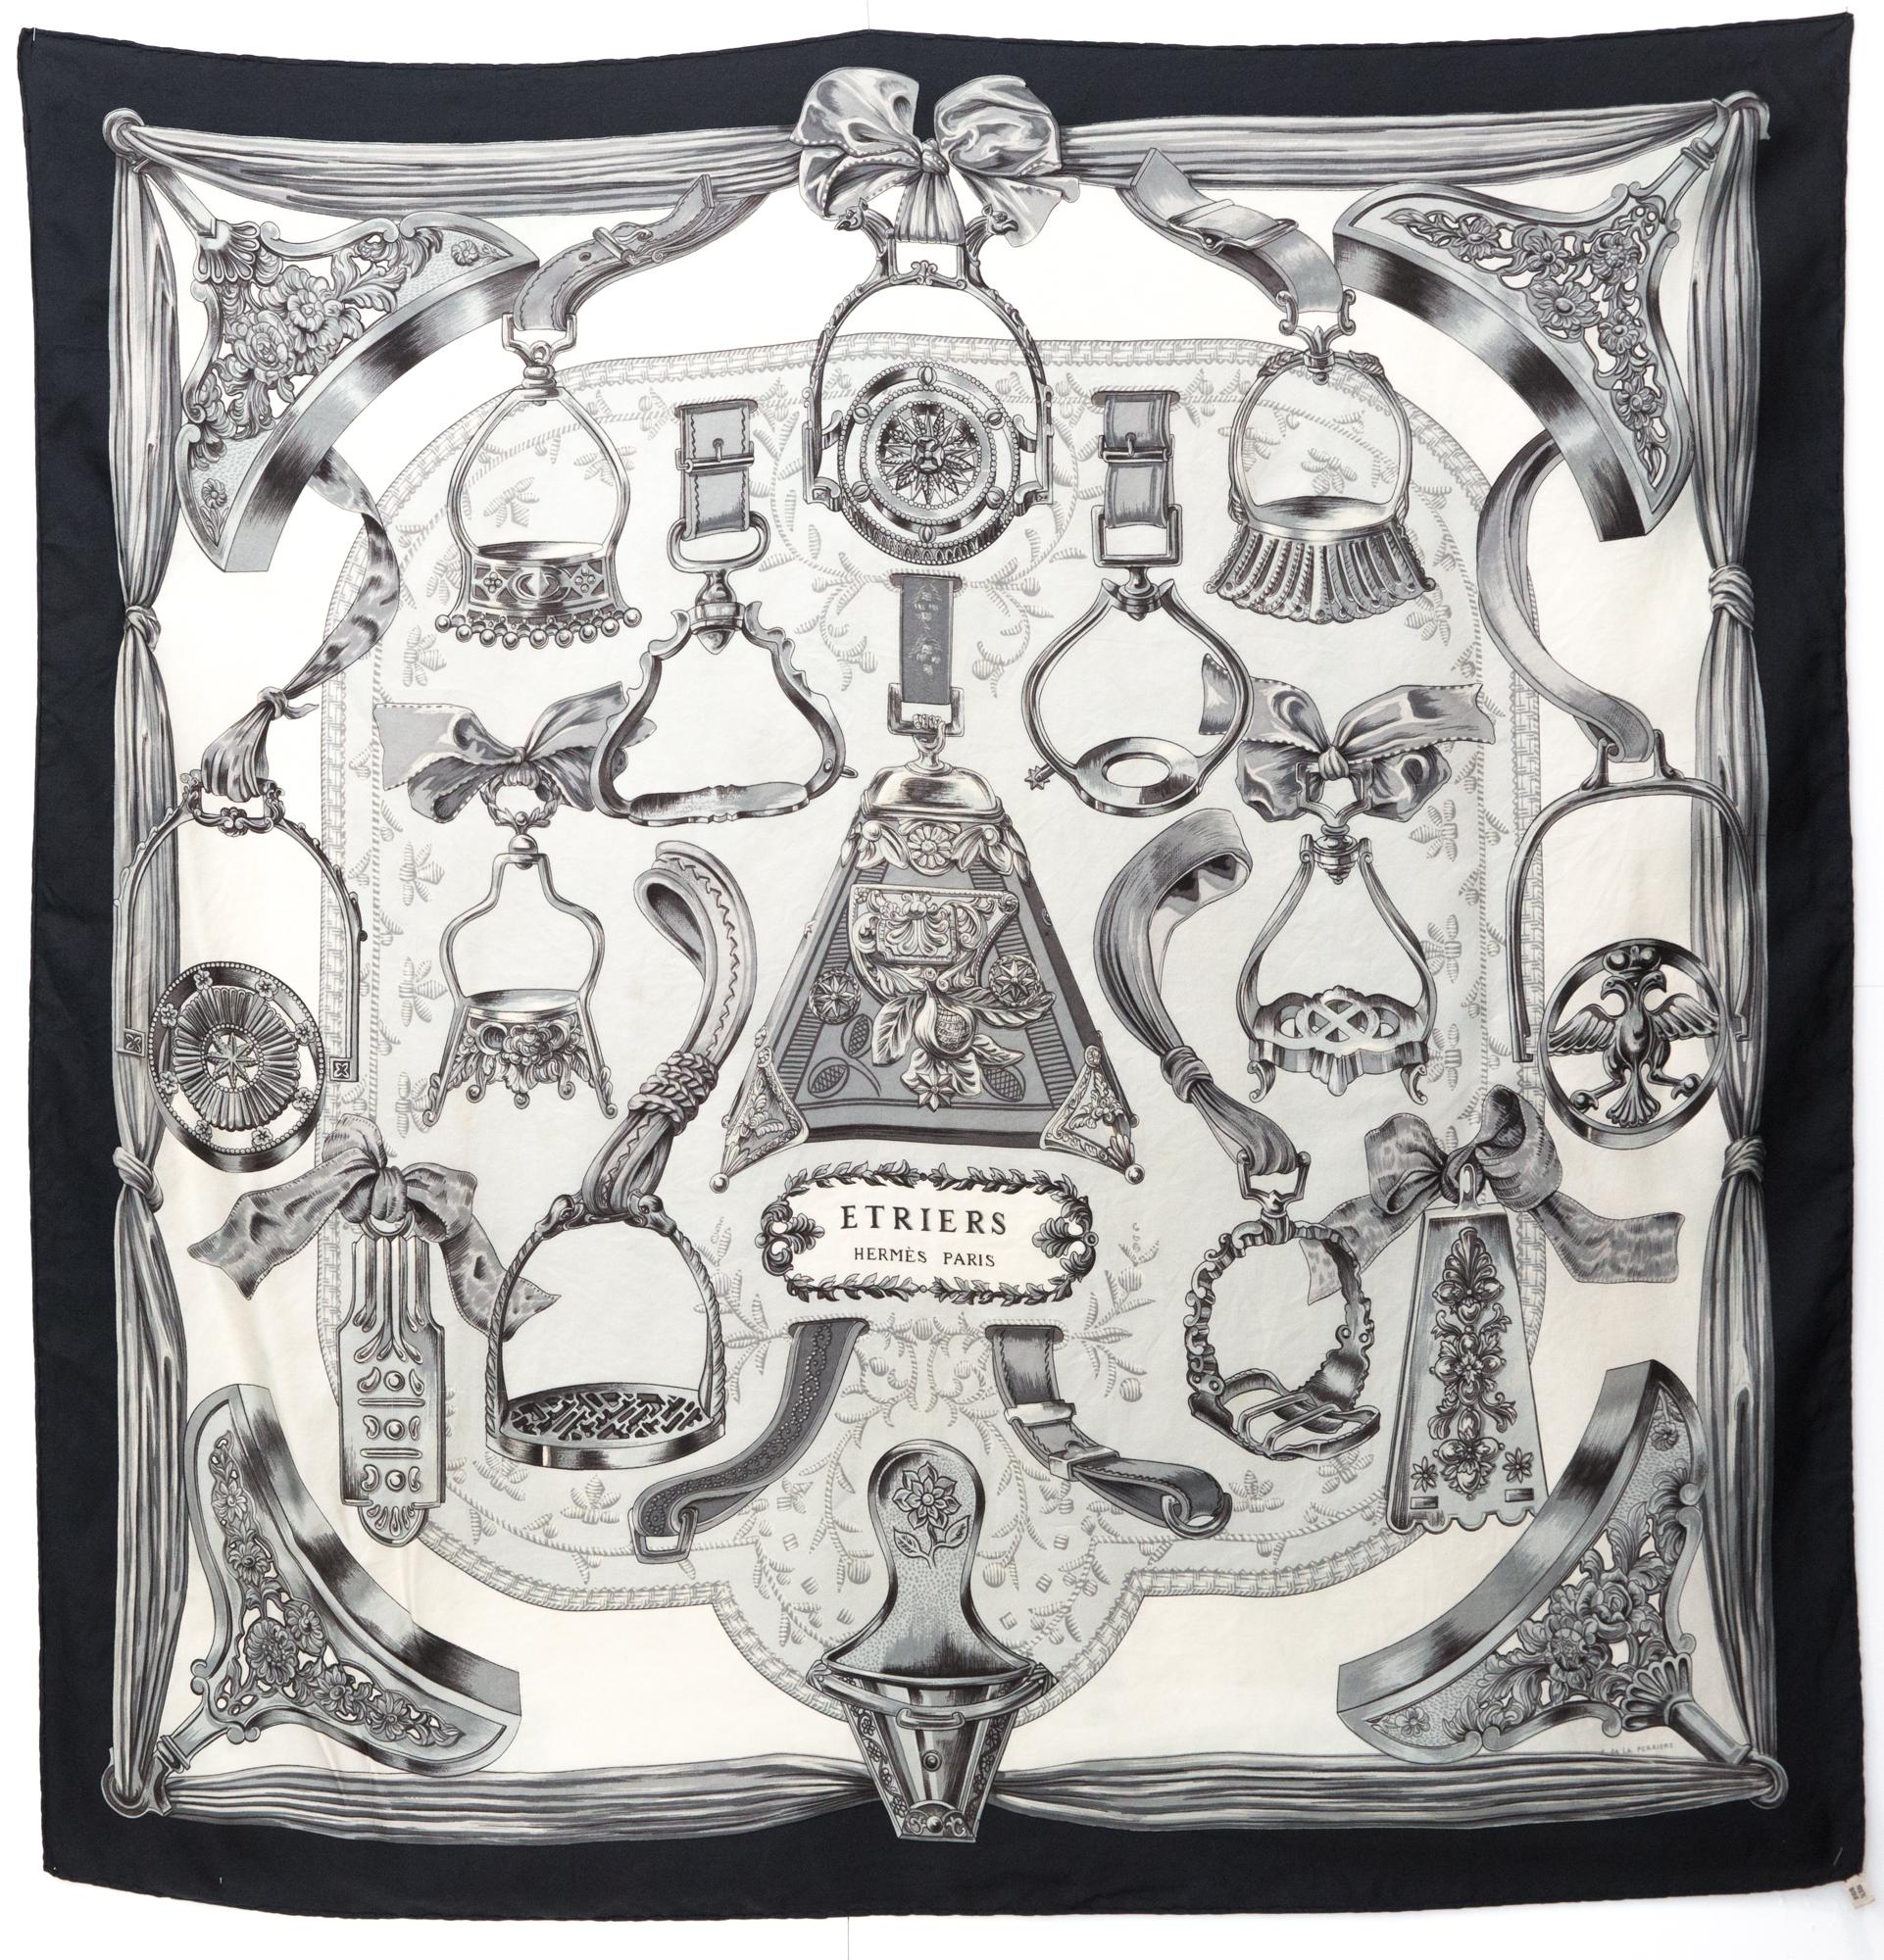 Hermes silk scarf “Etriers” F.de la Perriere featuring a black border, a Hermès signature. 
Circa 1964
In good vintage condition. Made in France.
35,4in. (90cm)  X 35,4in. (90cm)
We guarantee you will receive this  iconic item as described and